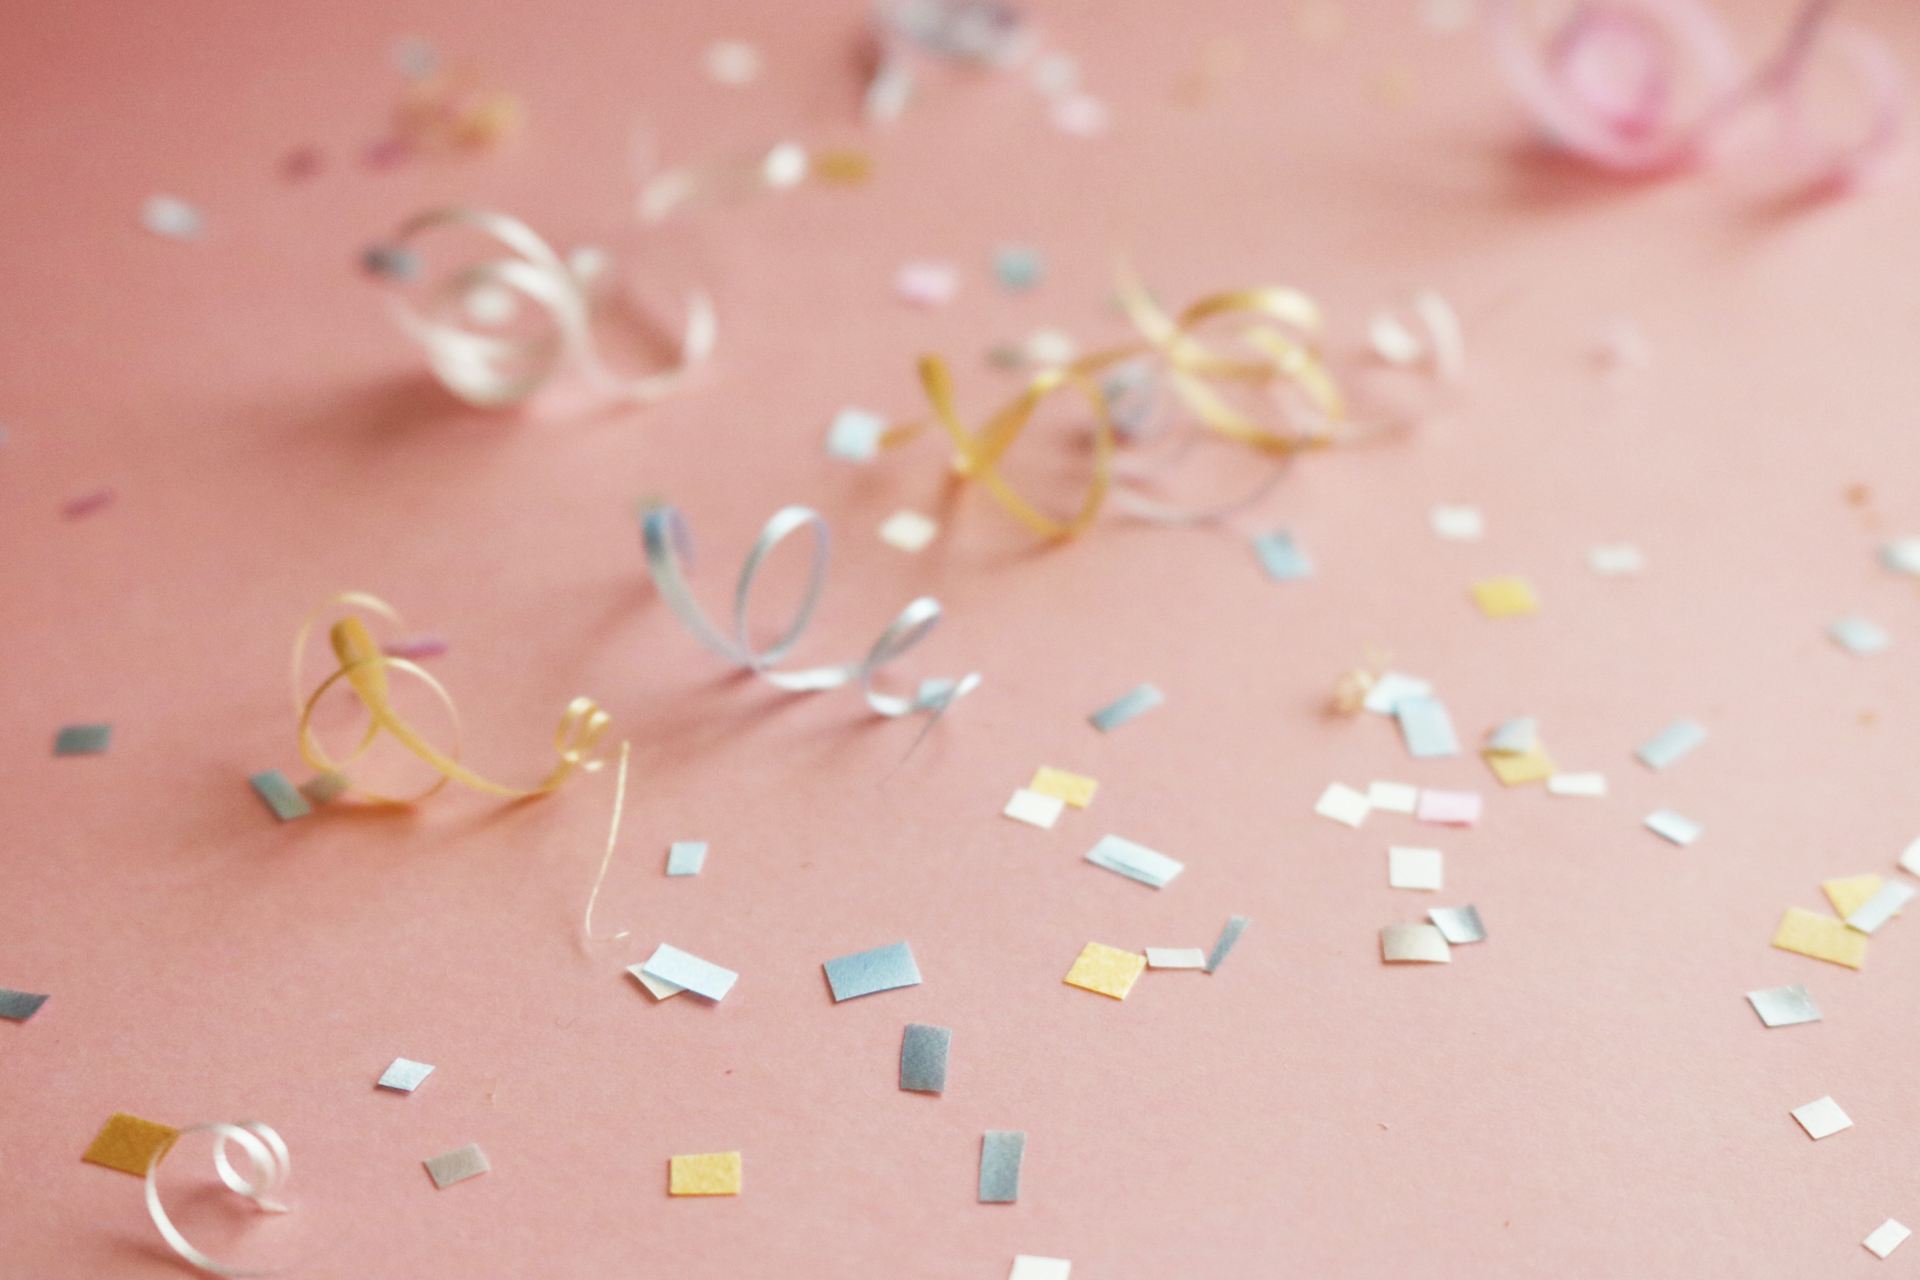 assorted-color confetti on floor